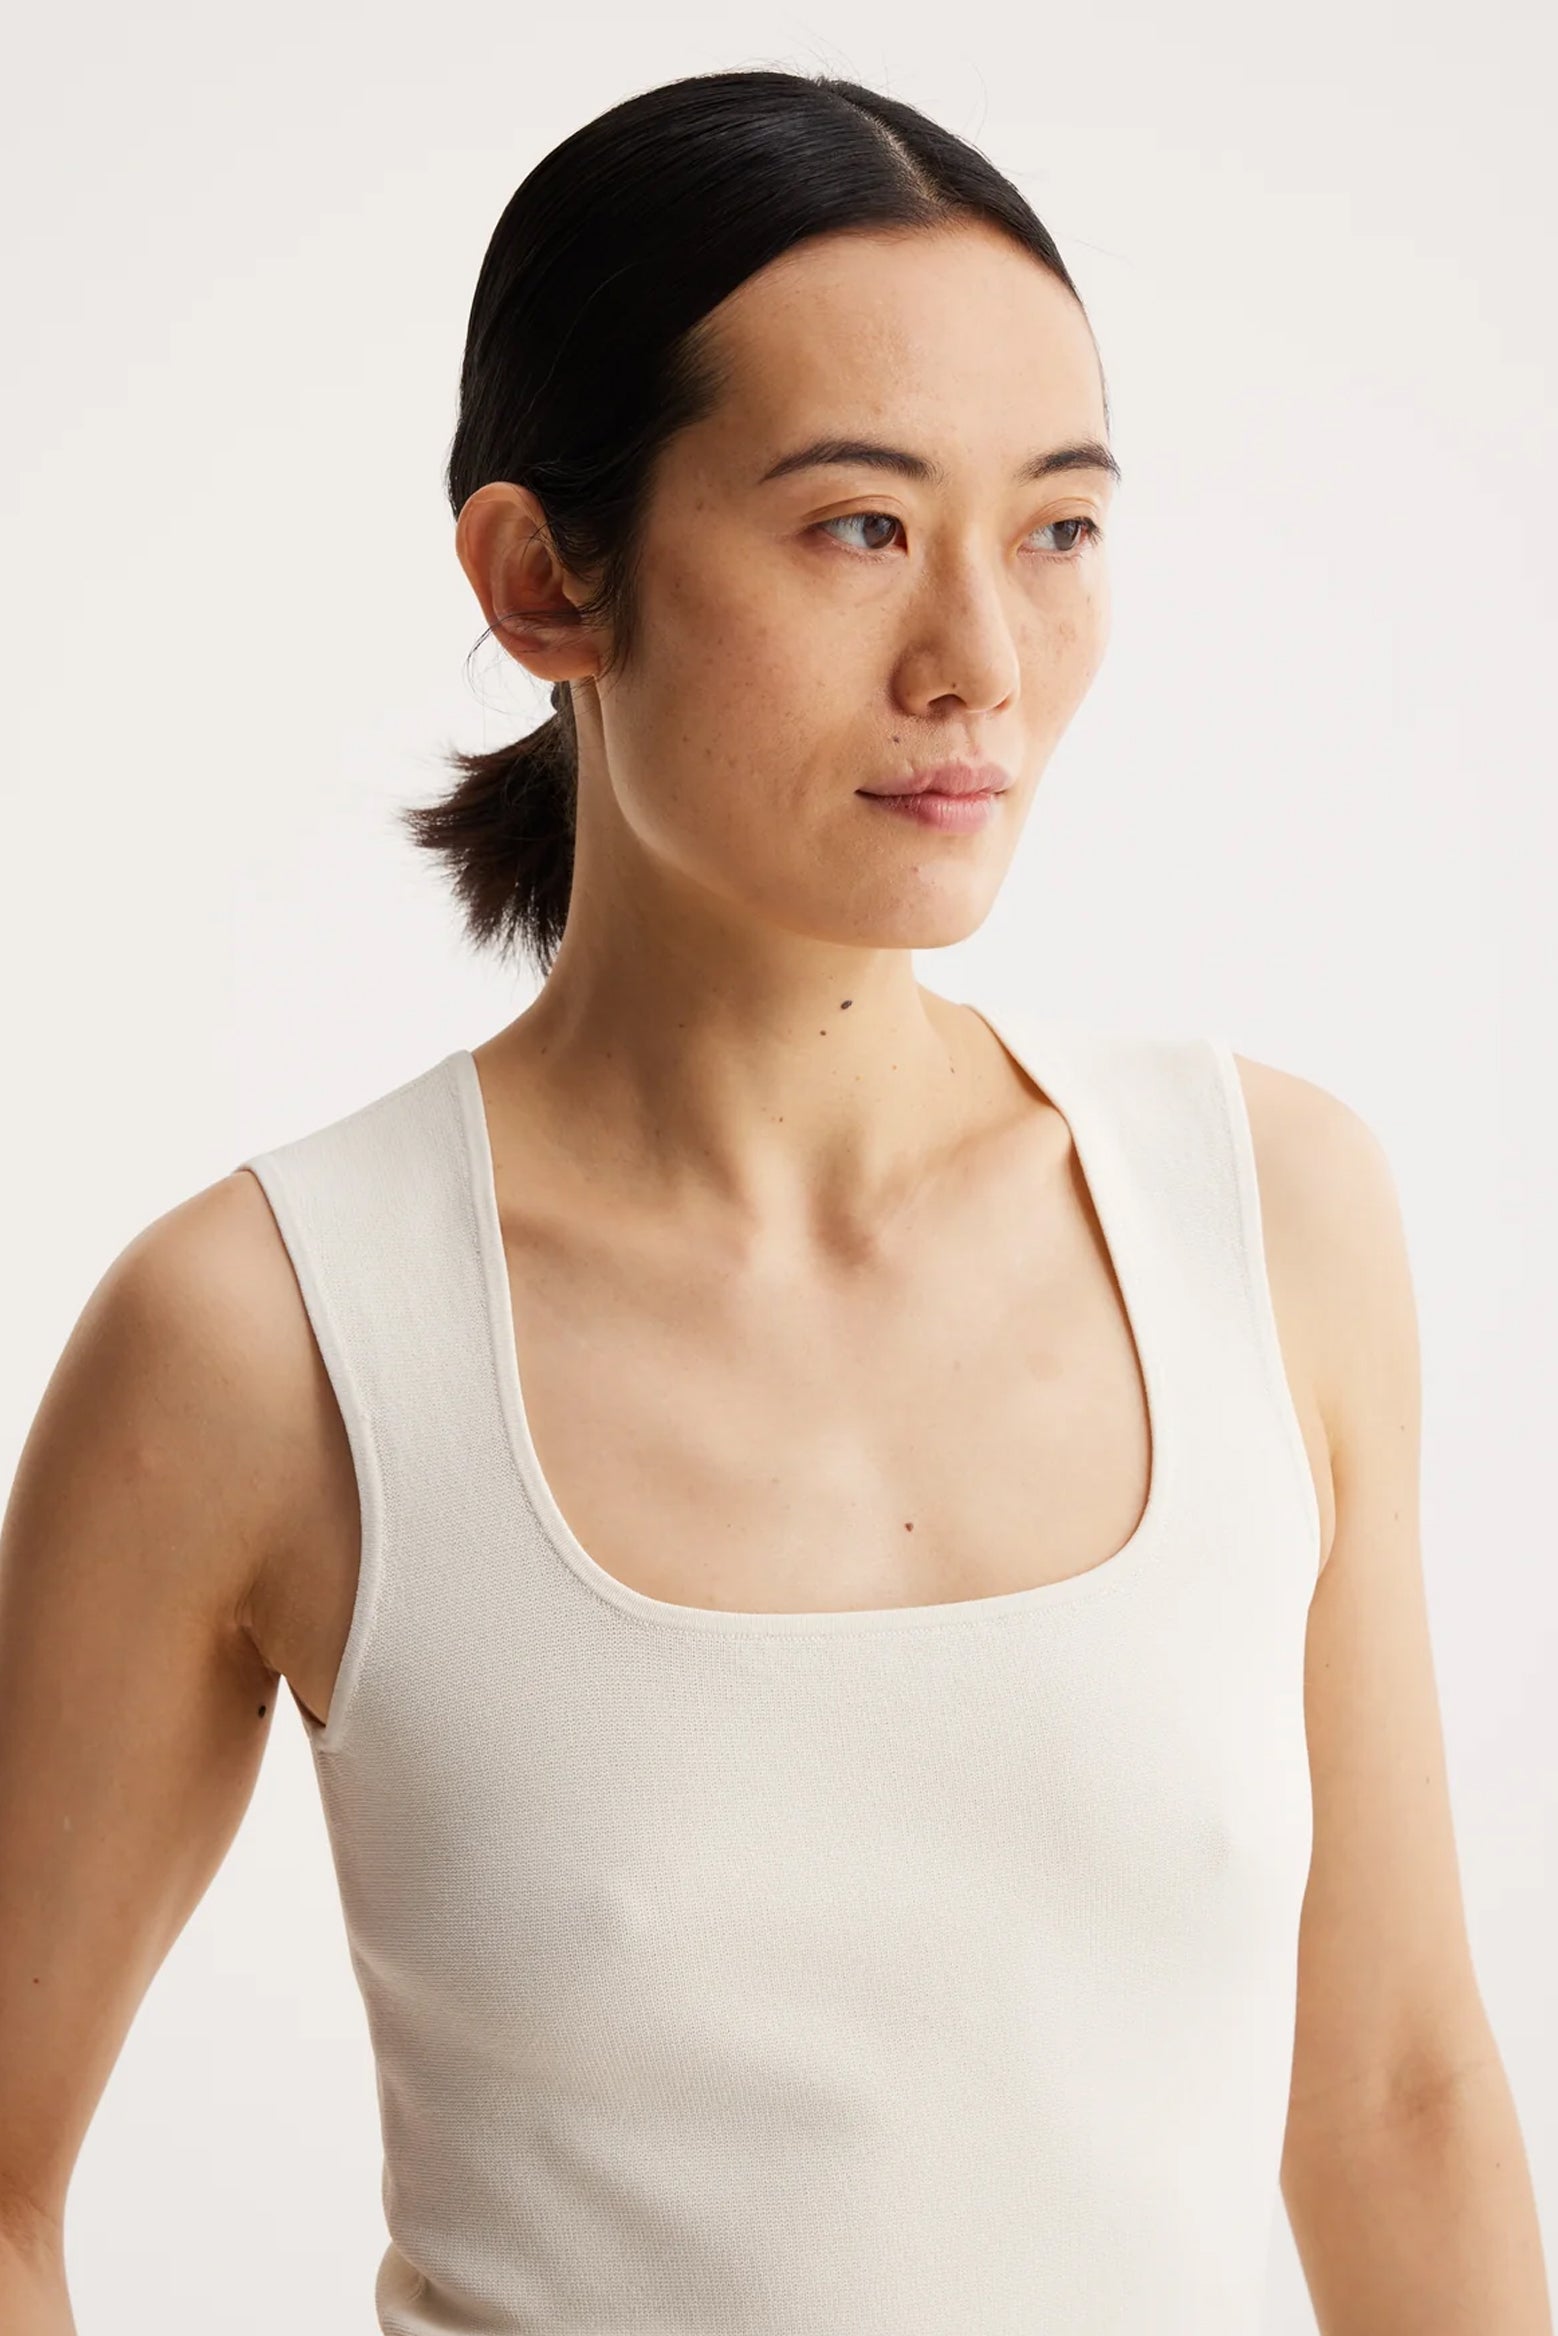 Rohe Bustier Bodice in Cream available at The New Trend Australia.